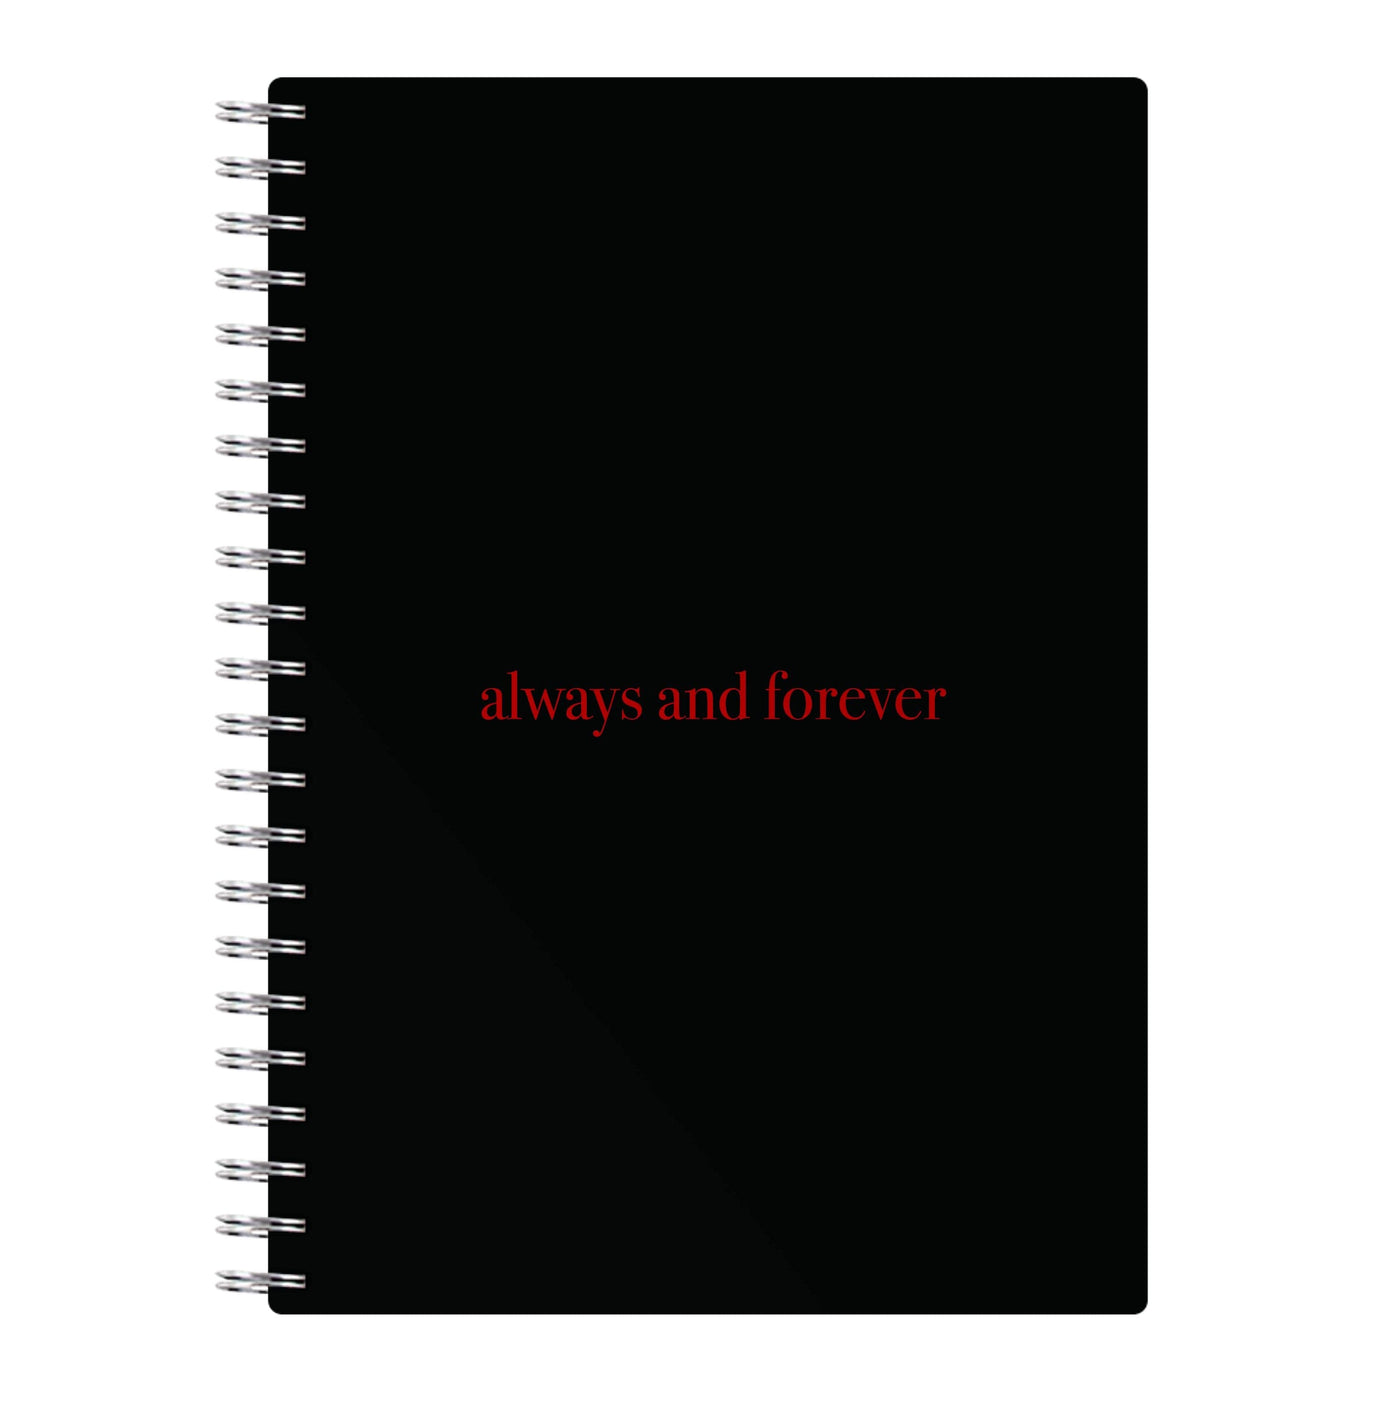 Always And Forever - The Originals Notebook